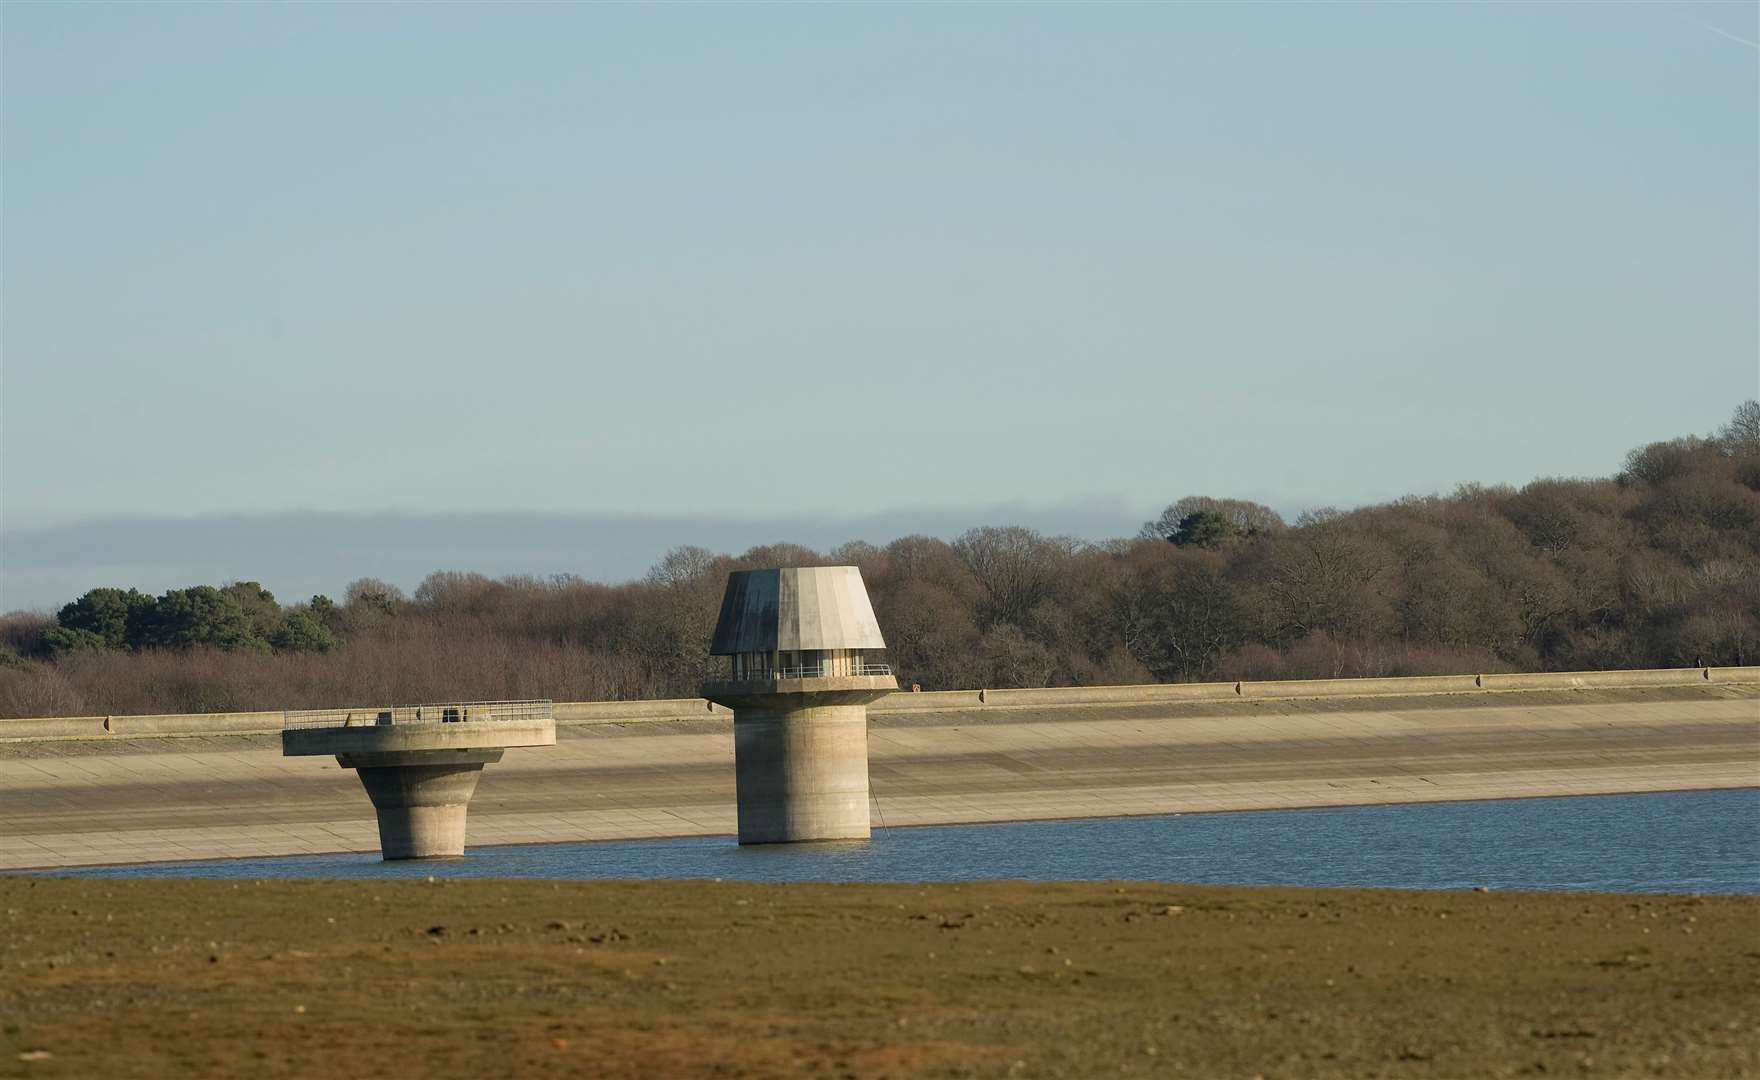 Bewl Water reservoir in Lamberhurst sees levels dip during hot periods. Picture: Ady Kerry